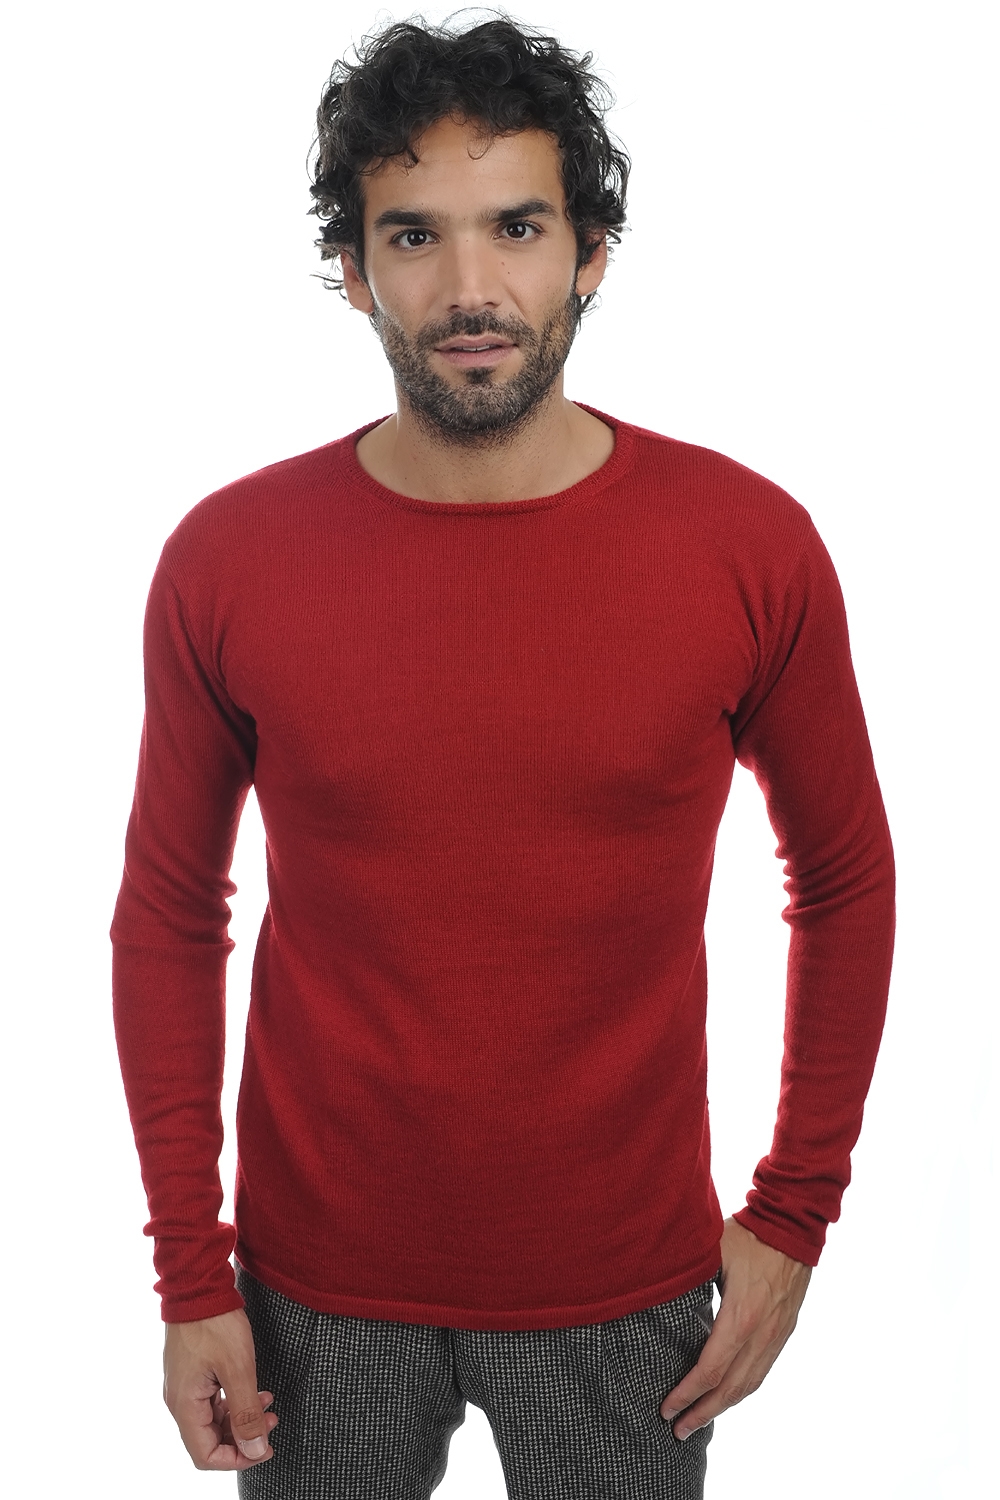 Baby Alpaga pull homme col rond christian rouge 2xl